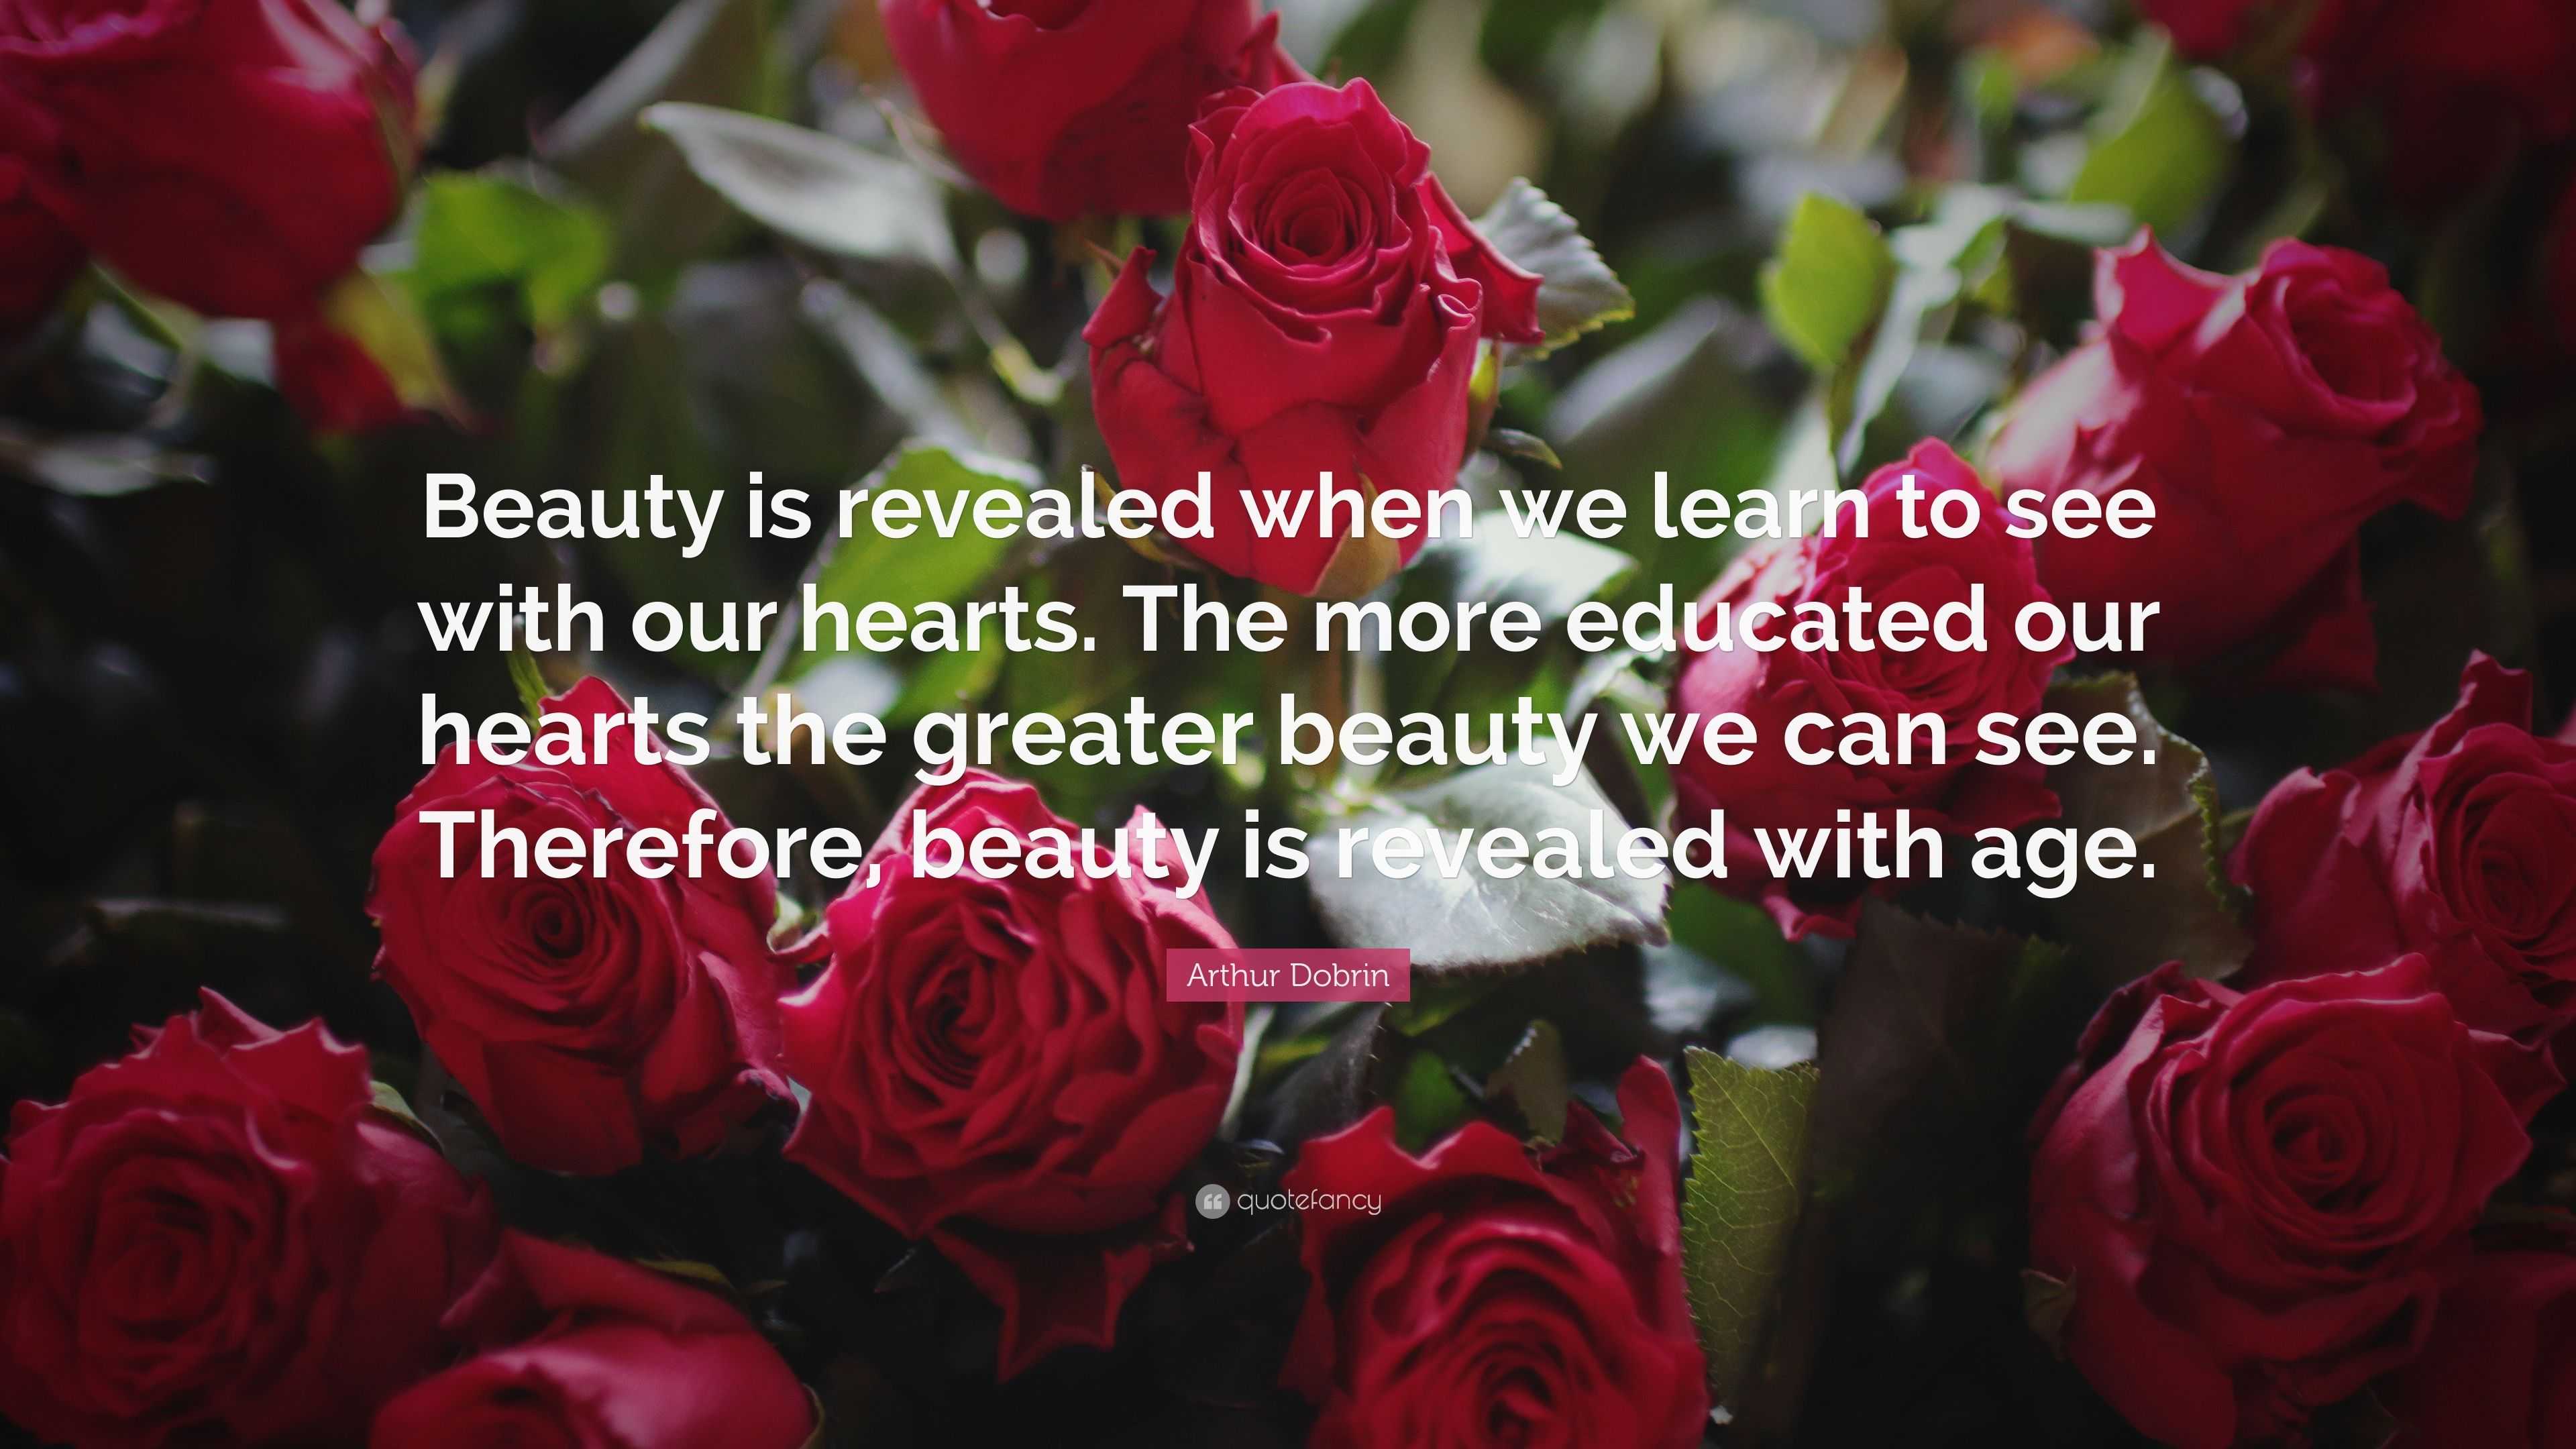 Arthur Dobrin Quote: “Beauty is revealed when we learn to see with our ...